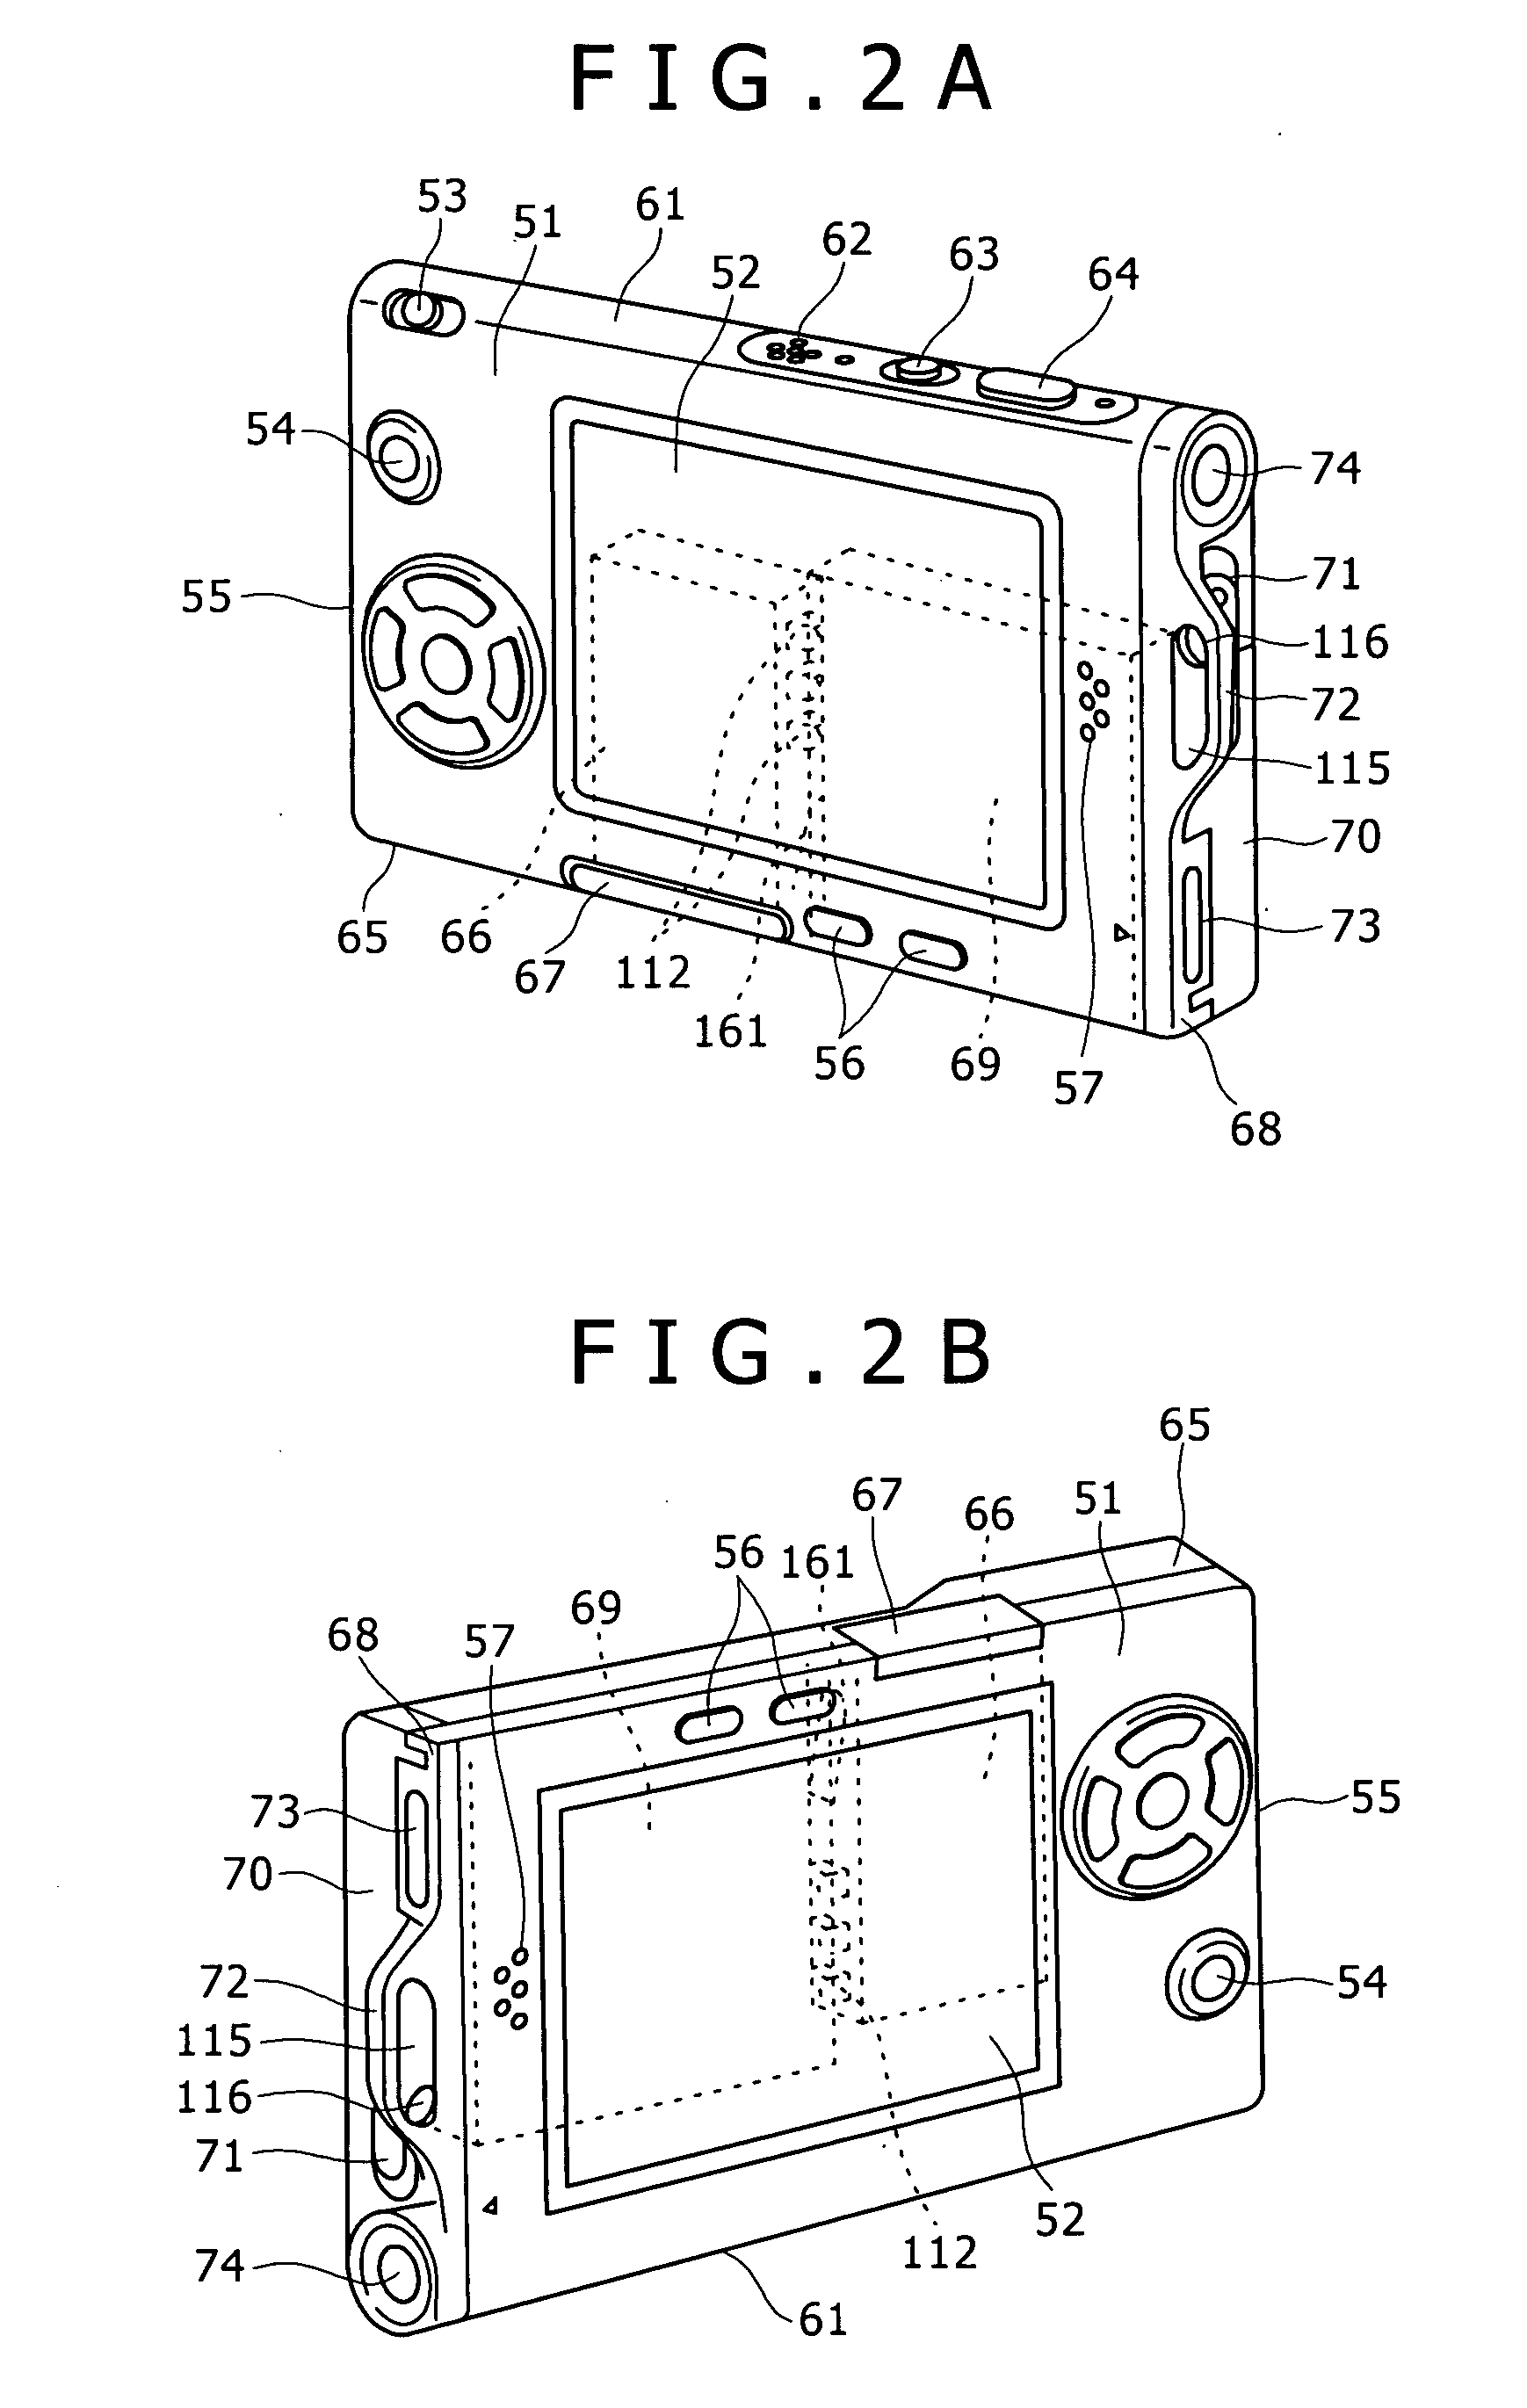 Electronic instrument